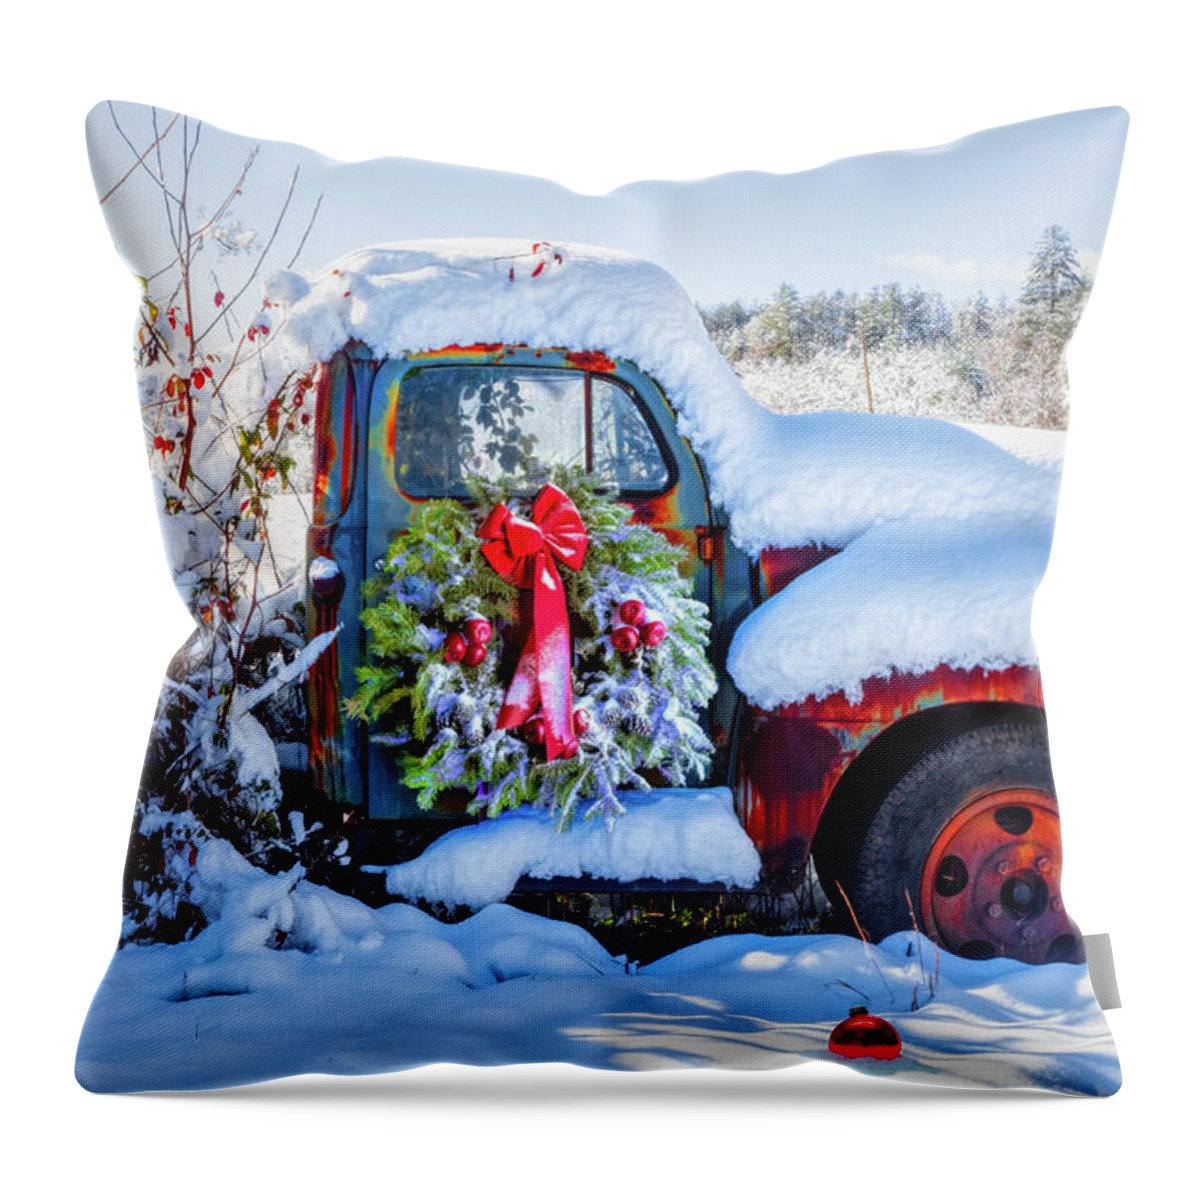 1950 Throw Pillow featuring the photograph Covered in Snow by Debra and Dave Vanderlaan